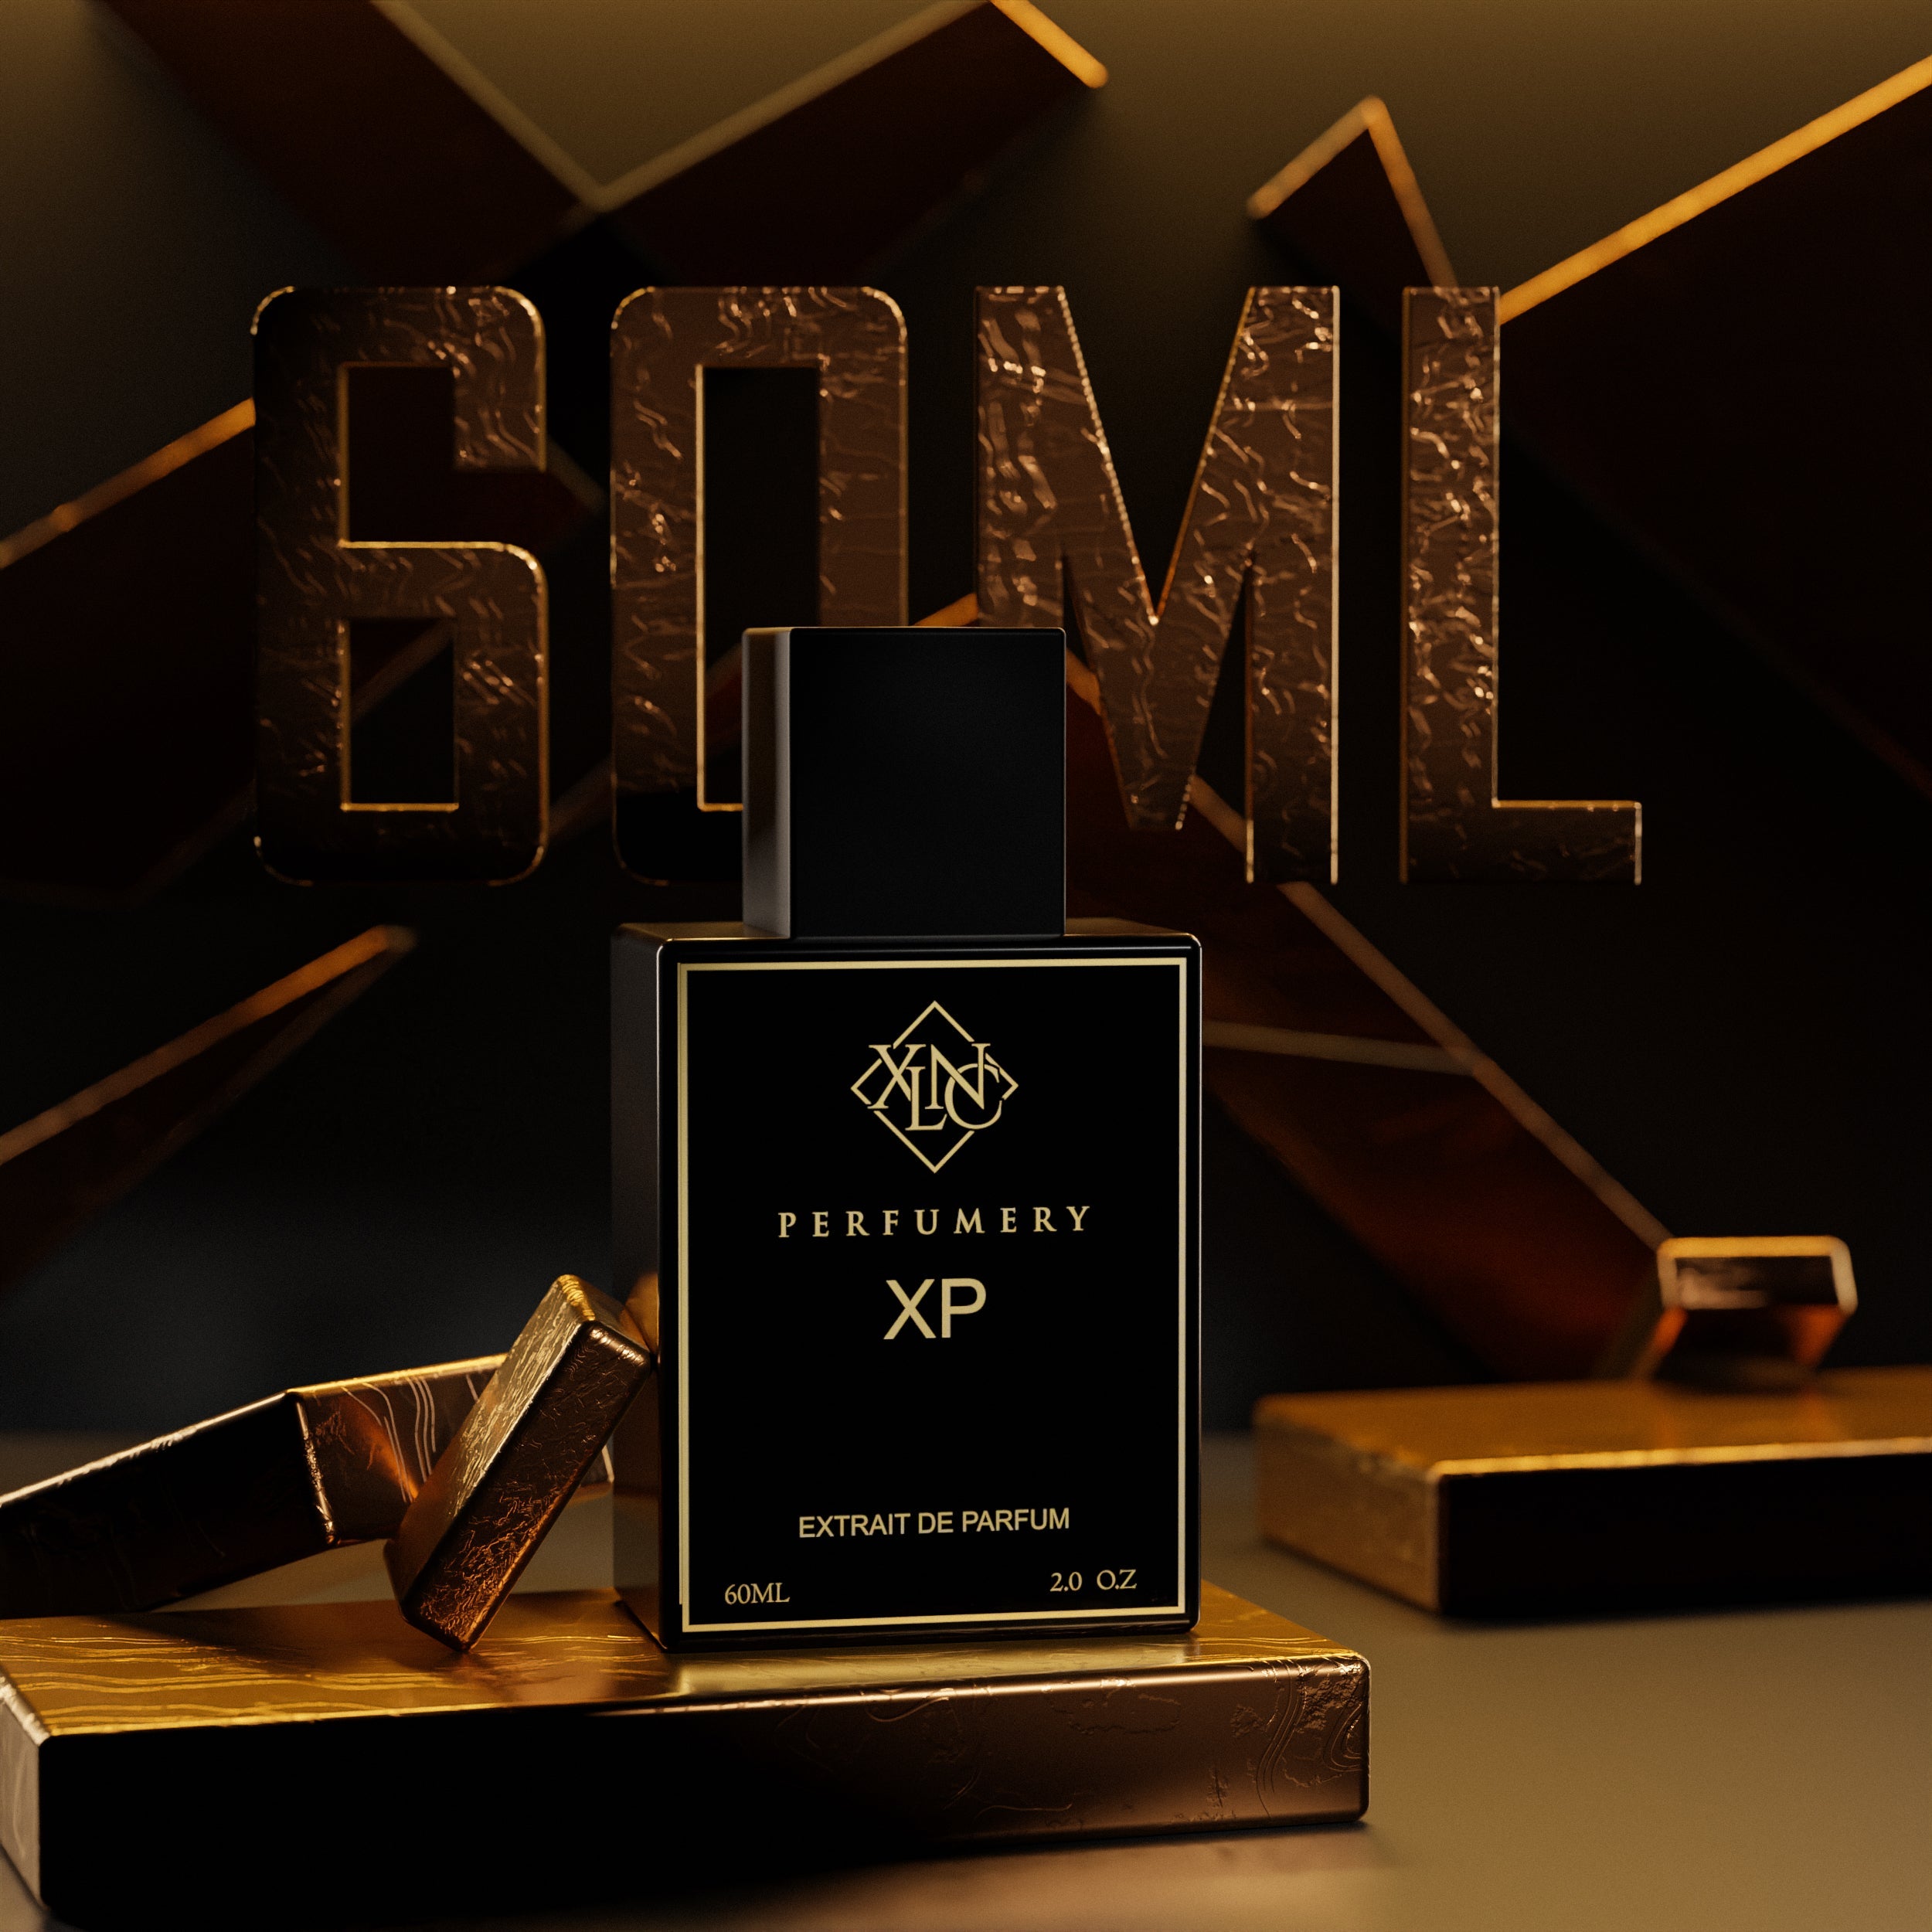 tom ford tobacco oud, tom ford tobacco oud price in india, tom ford tobacco oud review,tom ford tobacco oud clone perfume, tom ford tobacco oud inspired perfume, tom ford tobacco oud 100ml, tom ford tobacco oud 60ml, tom ford tobacco oud 20ml, tom ford tobacco oud notes